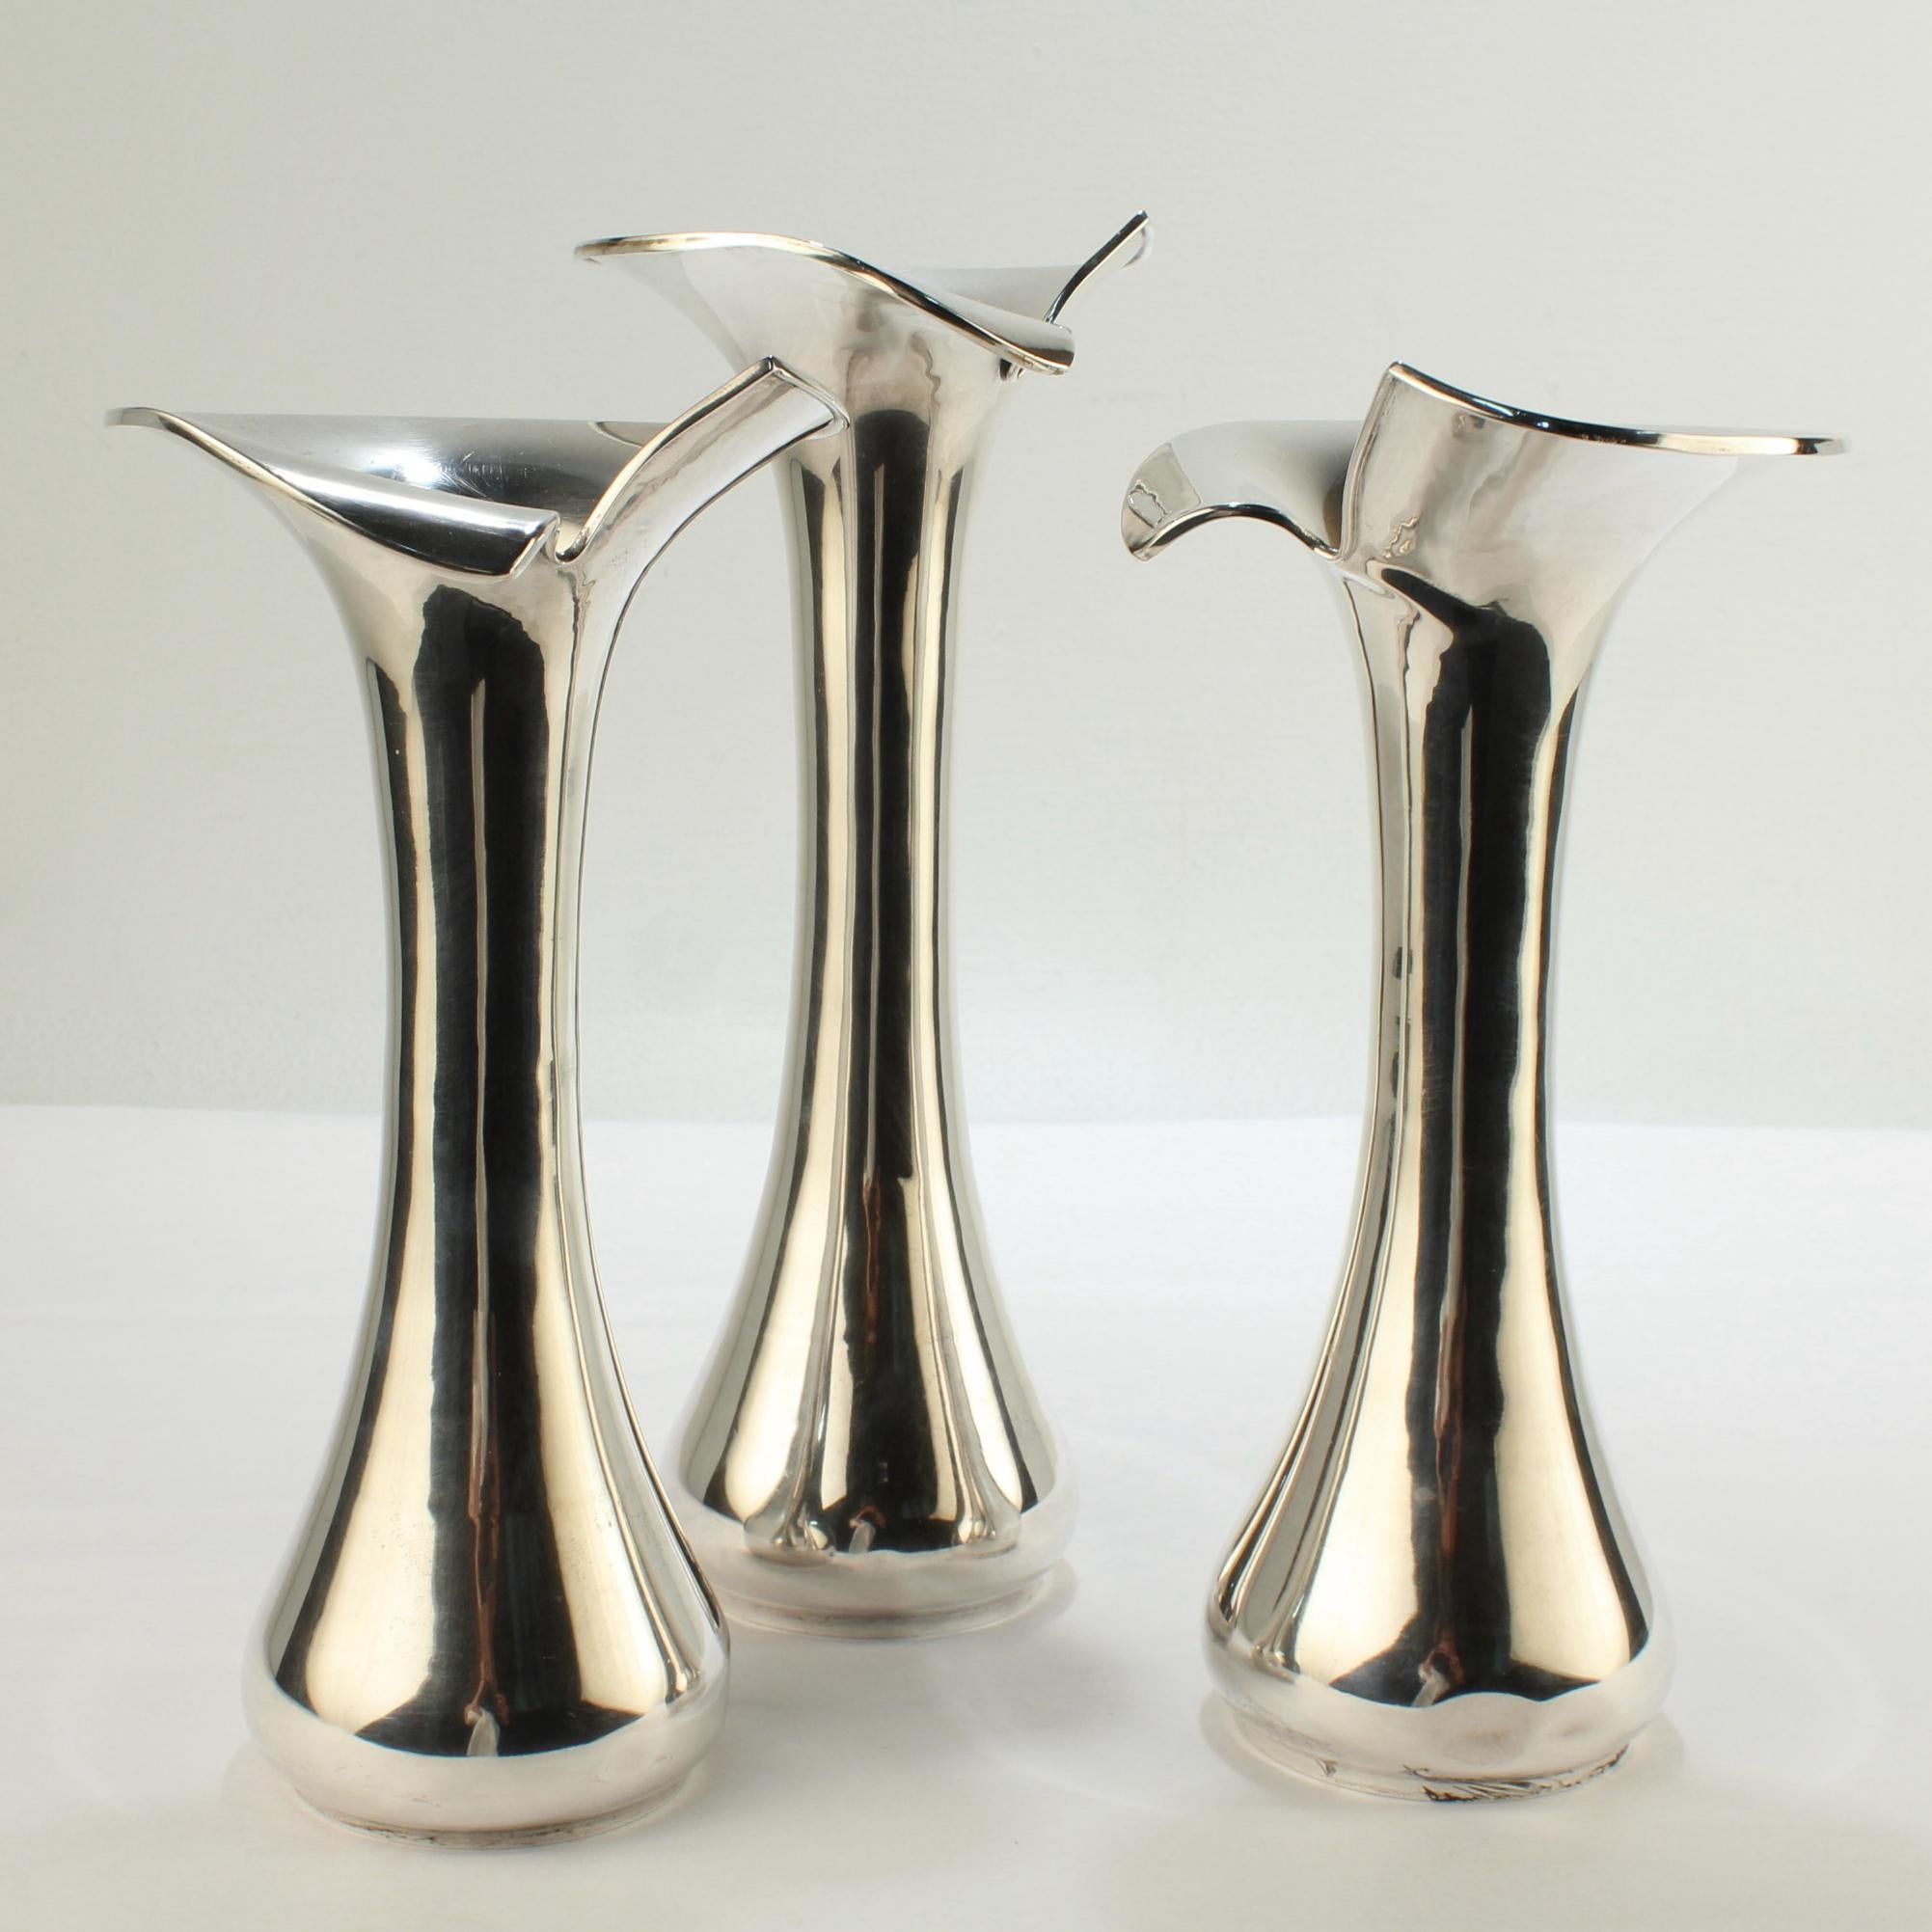 A fine group of 3 Modernist solid silver.

Each in .900 fineness silver with a 'split' trumpet form top, a tapered body and a rounded foot.

We believe that these vases are quite likely Brazilian. Each is struck with an R that we believe is likely